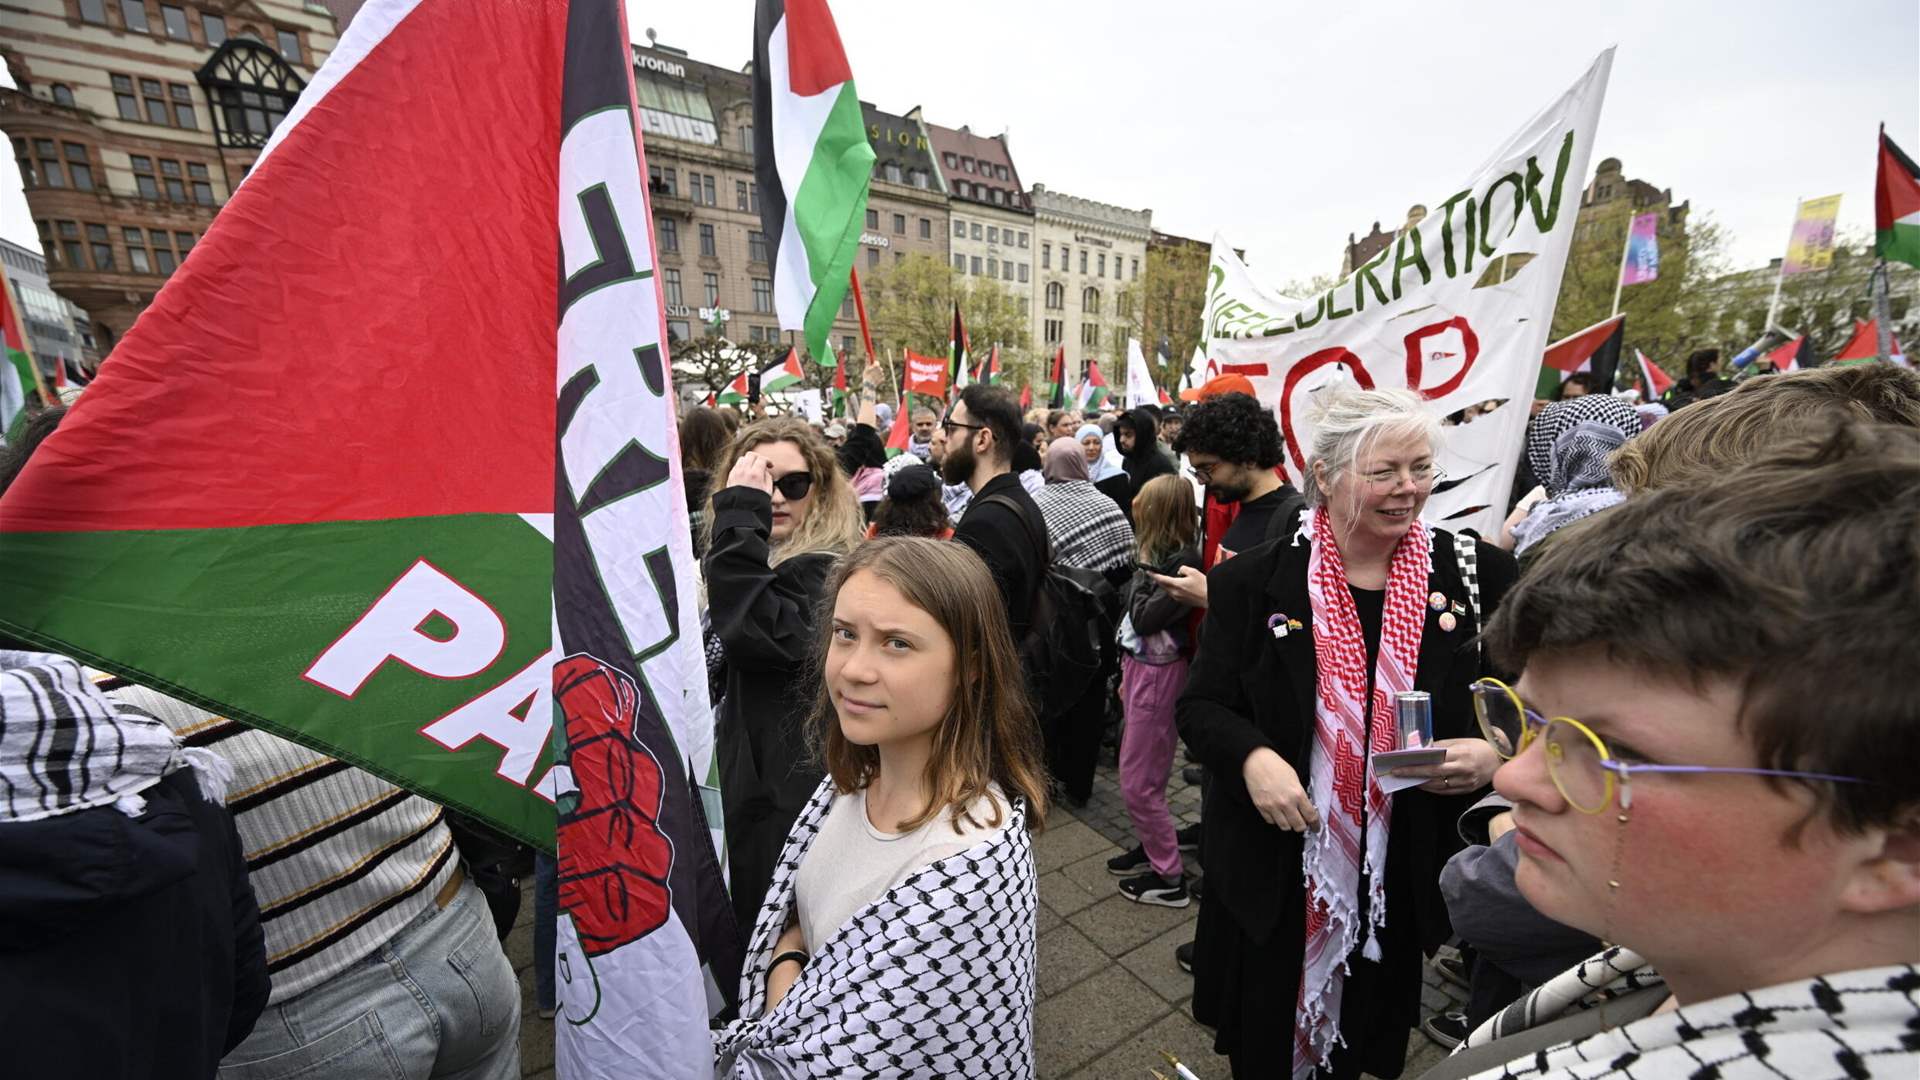 Israel&#39;s participation in Eurovision faces criticism amid pro-Gaza protests in Sweden